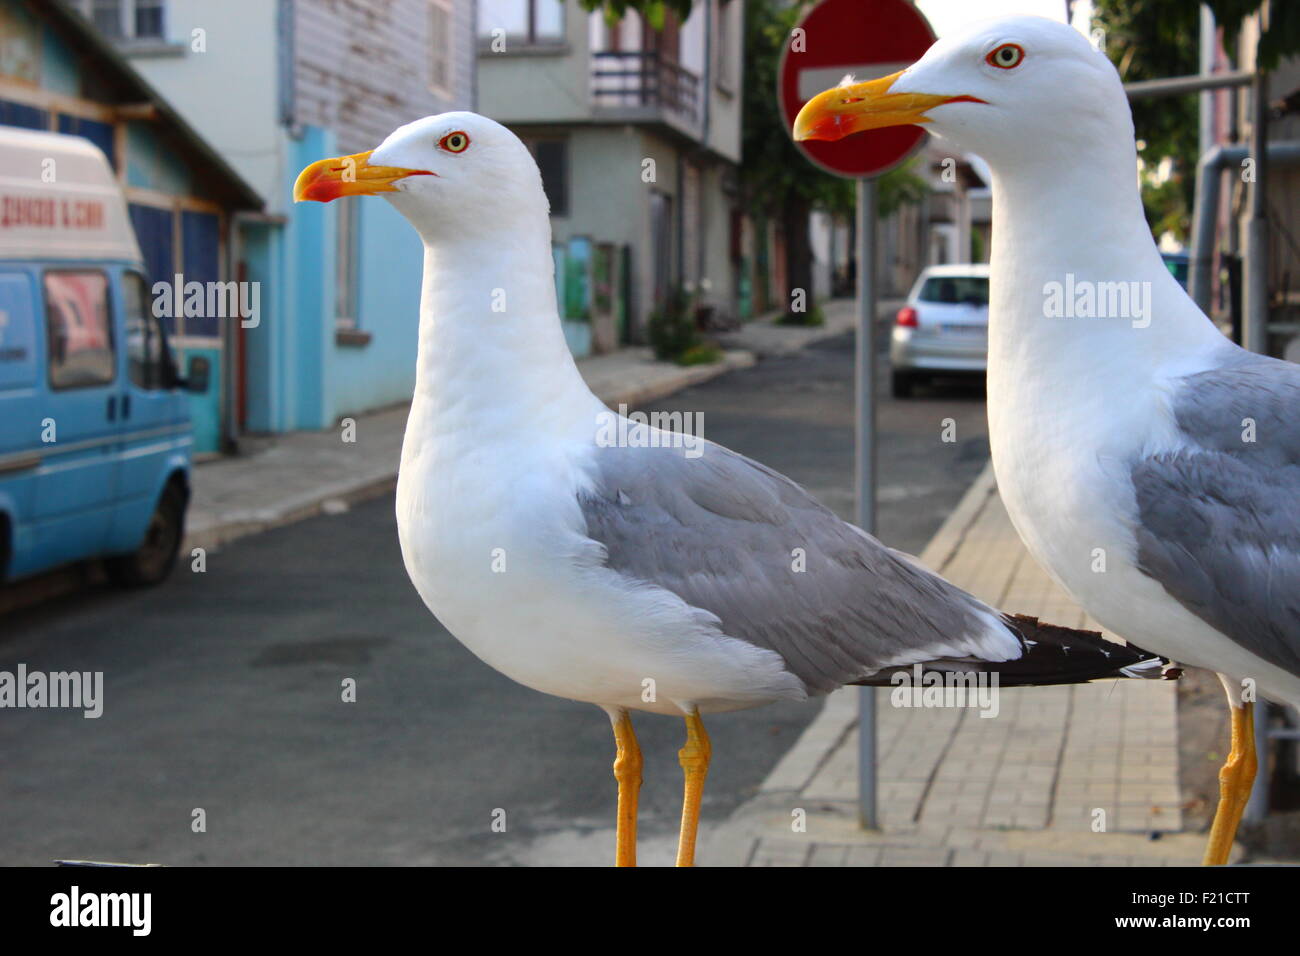 Two seagulls teaming up in the town Stock Photo